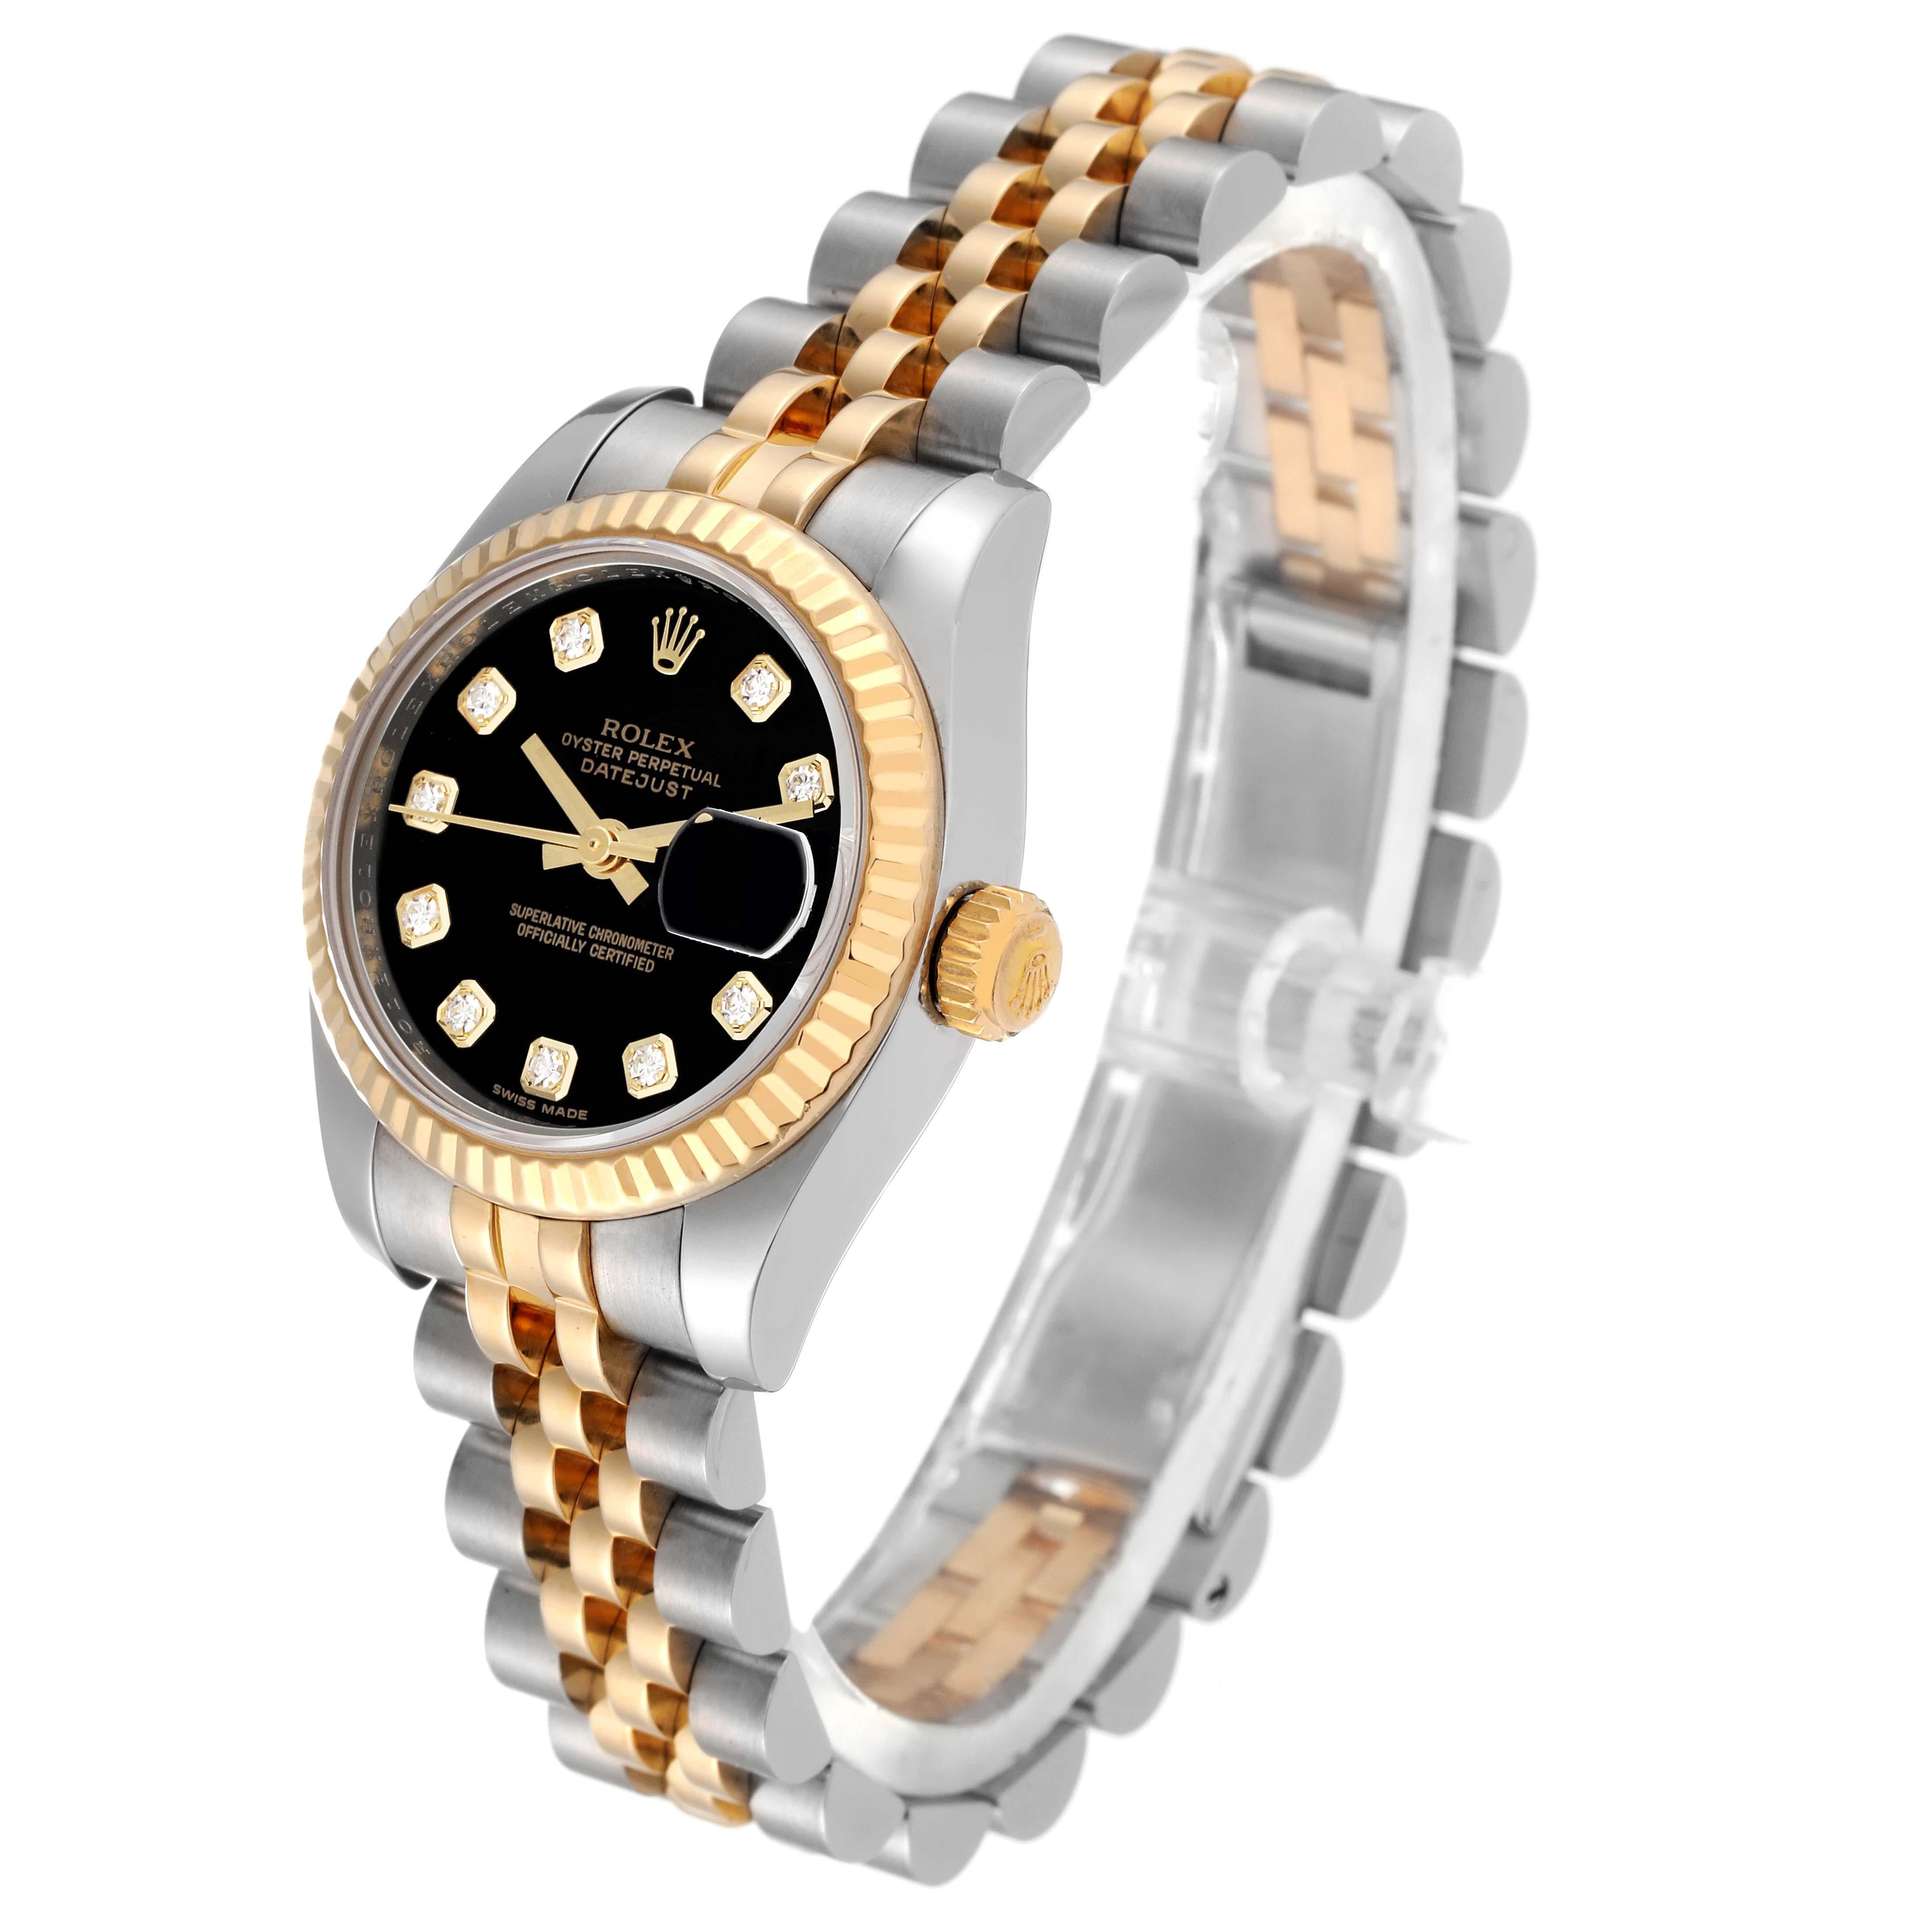 Rolex Datejust Diamond Dial Steel Yellow Gold Ladies Watch 179173 Box Card For Sale 3